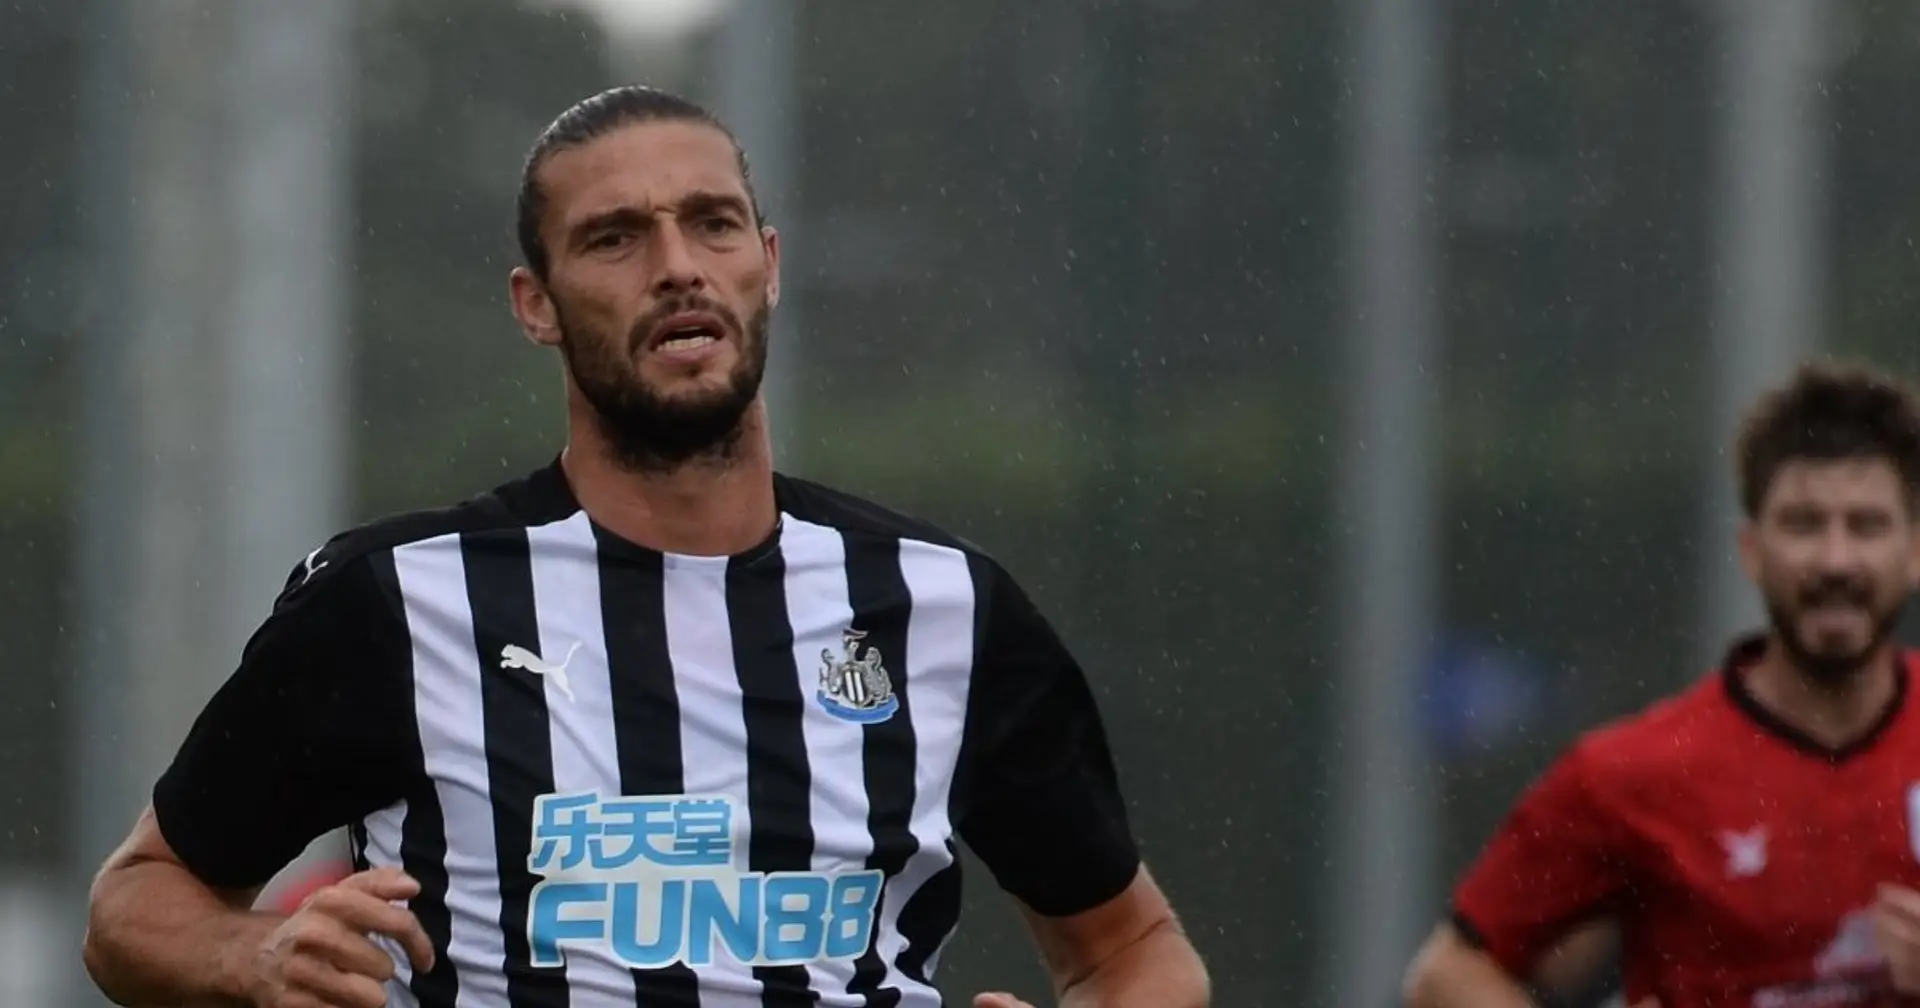 'Rich f****** c***': Restaurant owner slaps X-rated note on Andy Carroll's car 